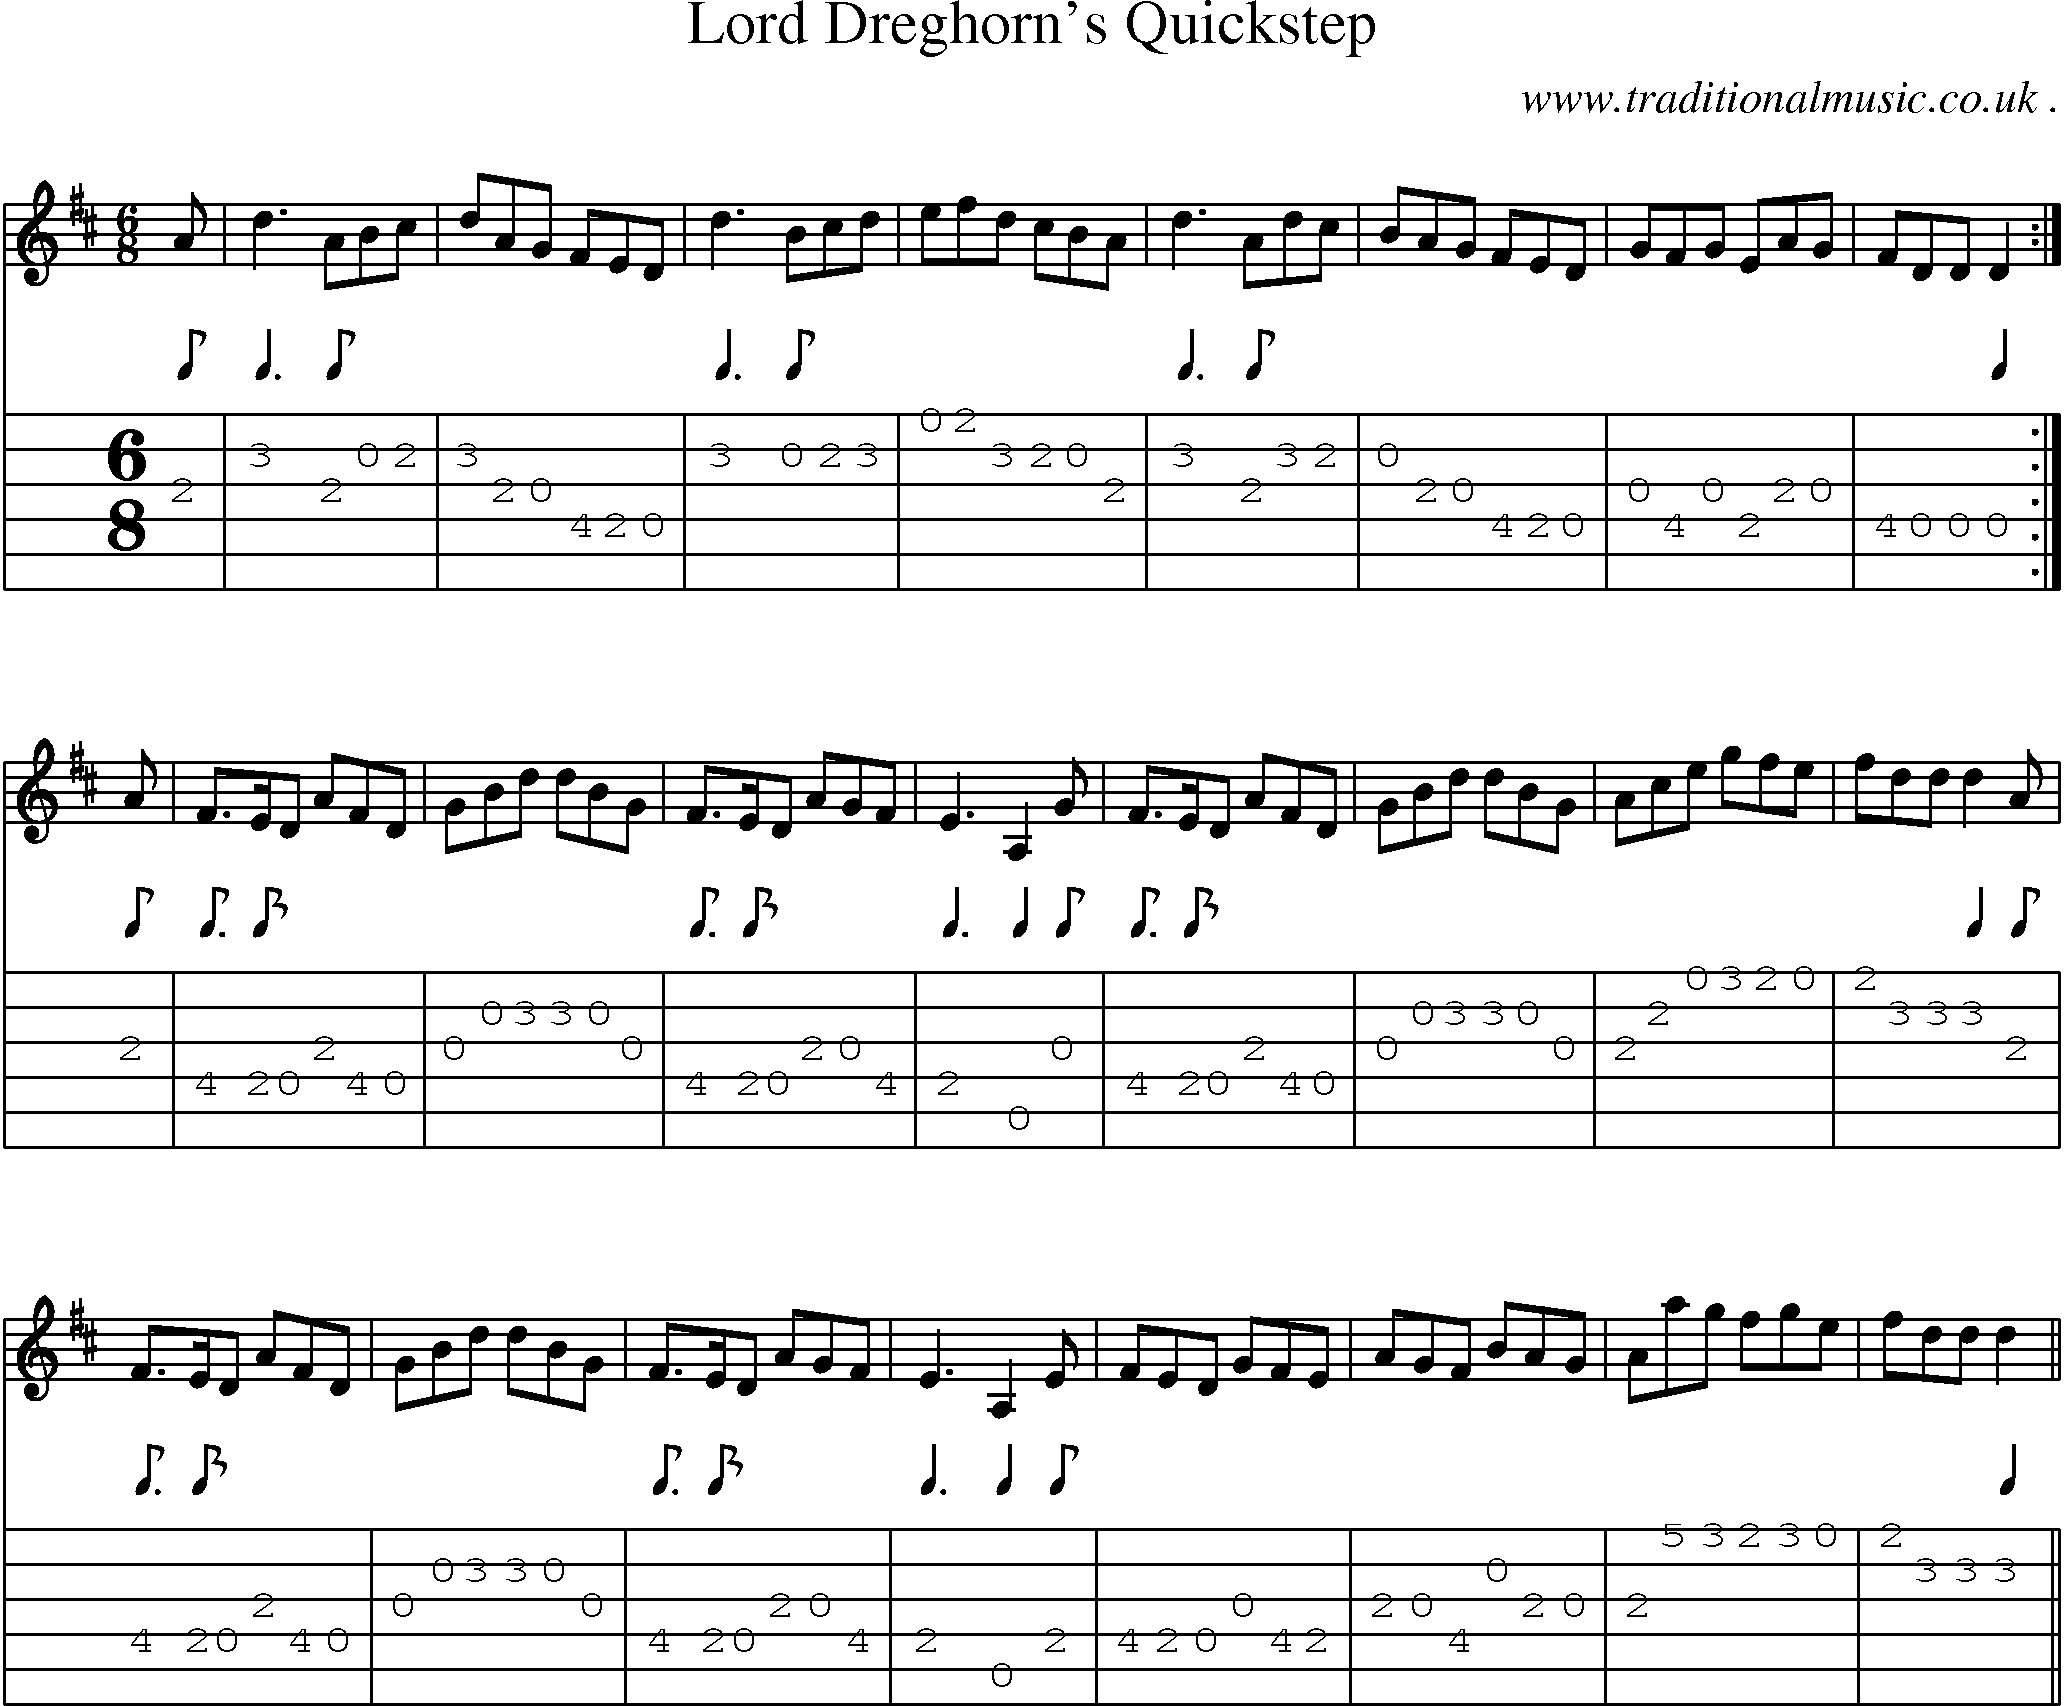 Sheet-music  score, Chords and Guitar Tabs for Lord Dreghorns Quickstep